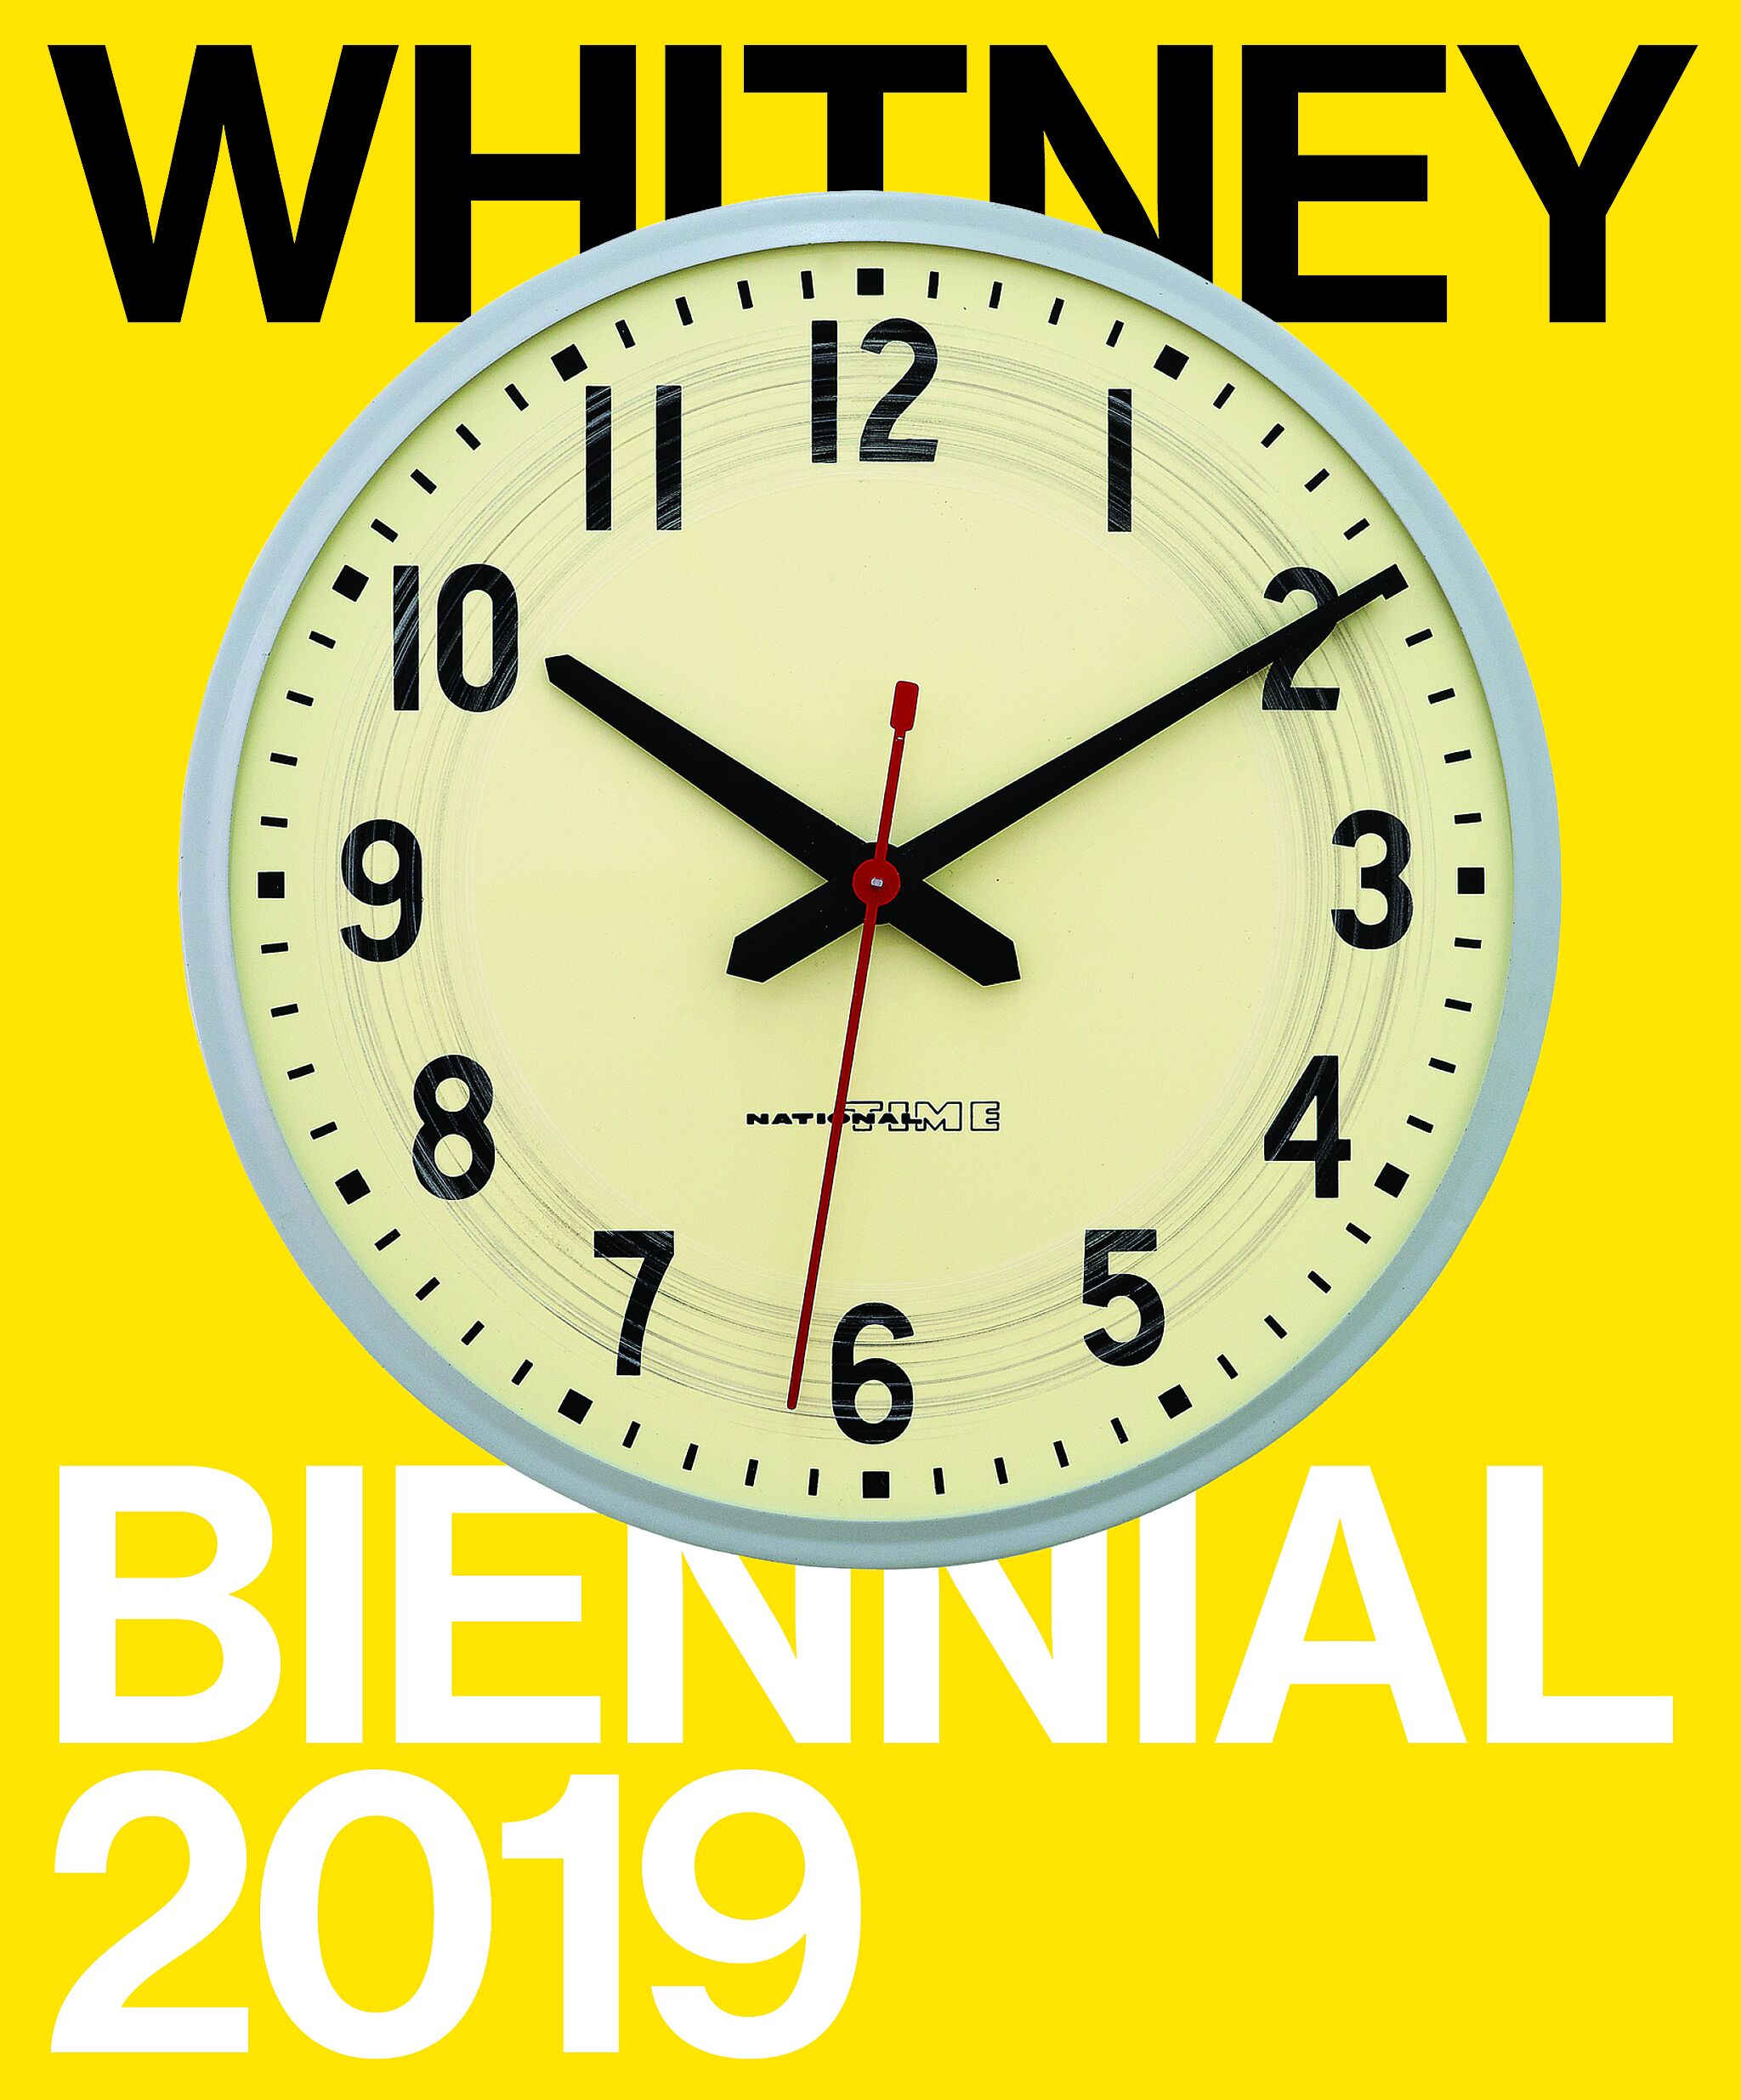 Text that says Whitney Biennial 2019 with a round clock in the middle.